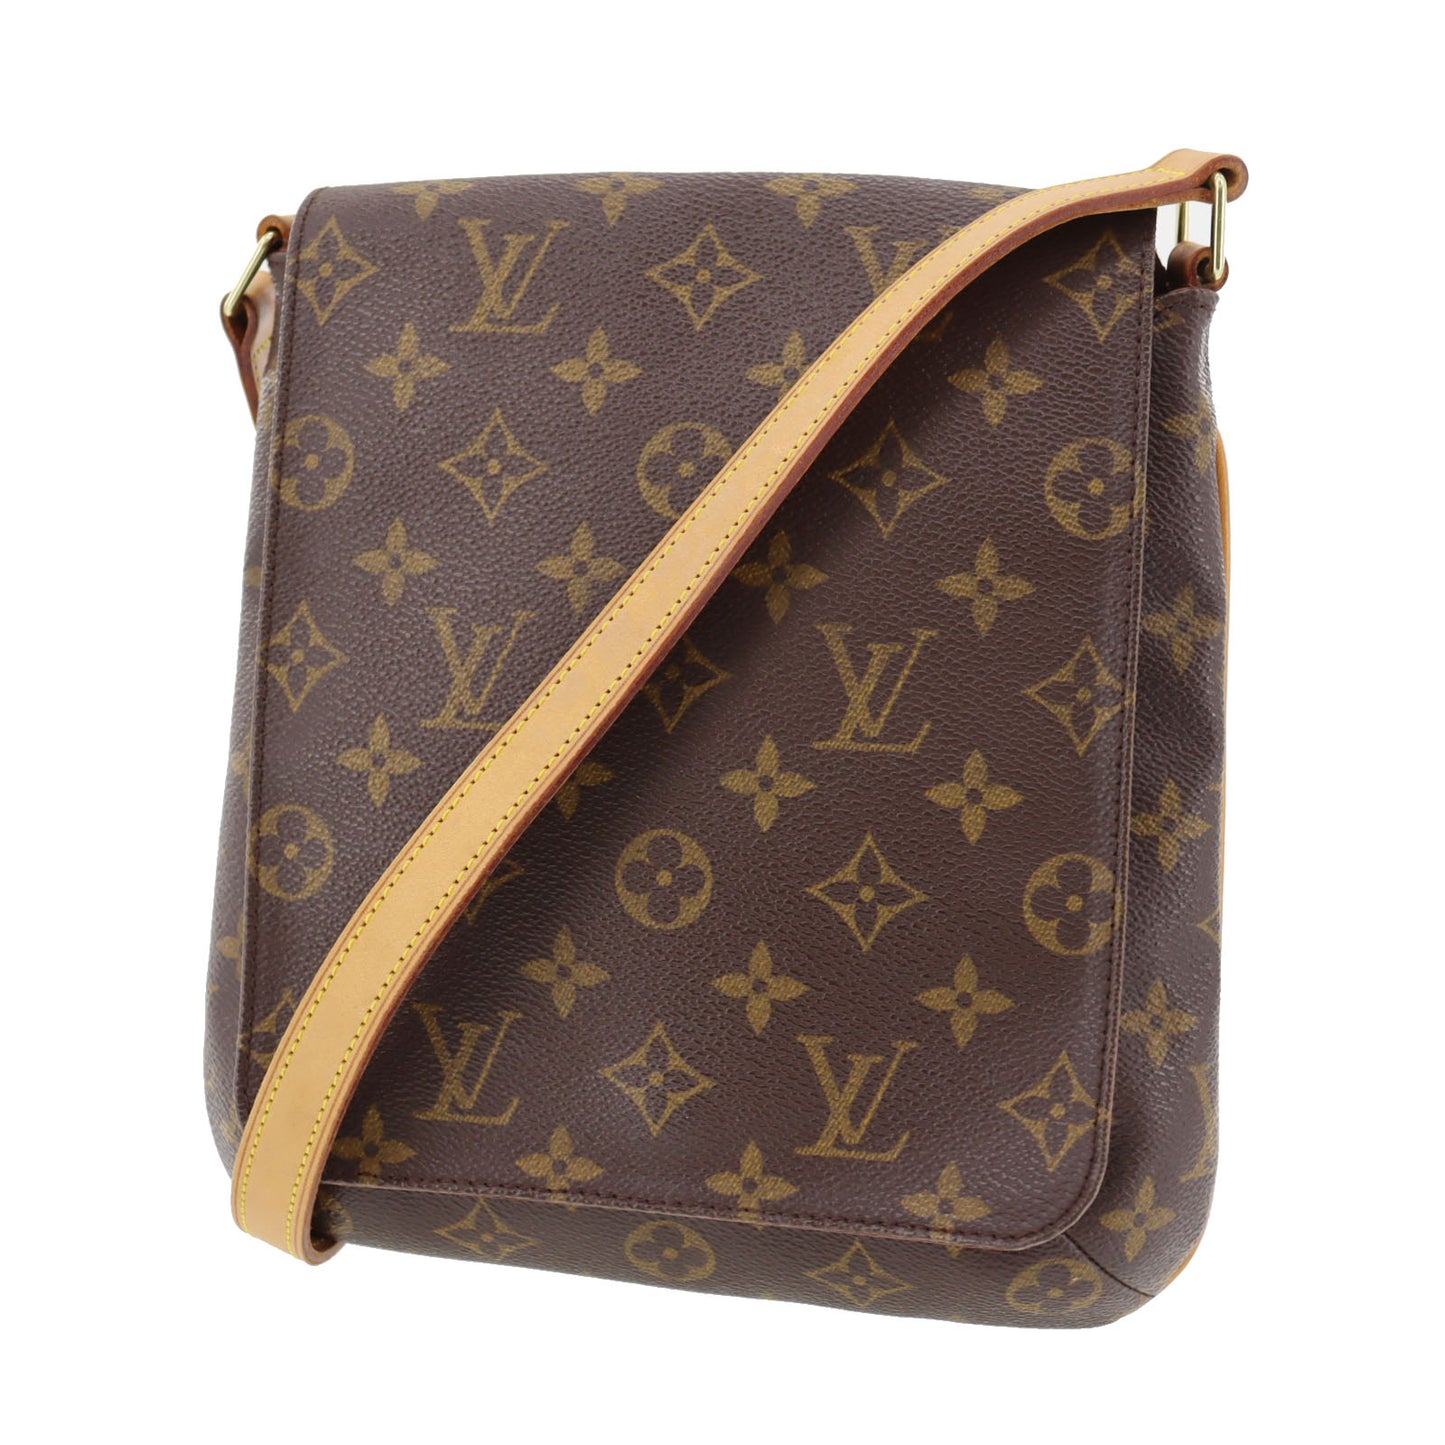 Buy [Used] LOUIS VUITTON Musette Salsa Shoulder Bag Short Strap Monogram  M51258 from Japan - Buy authentic Plus exclusive items from Japan